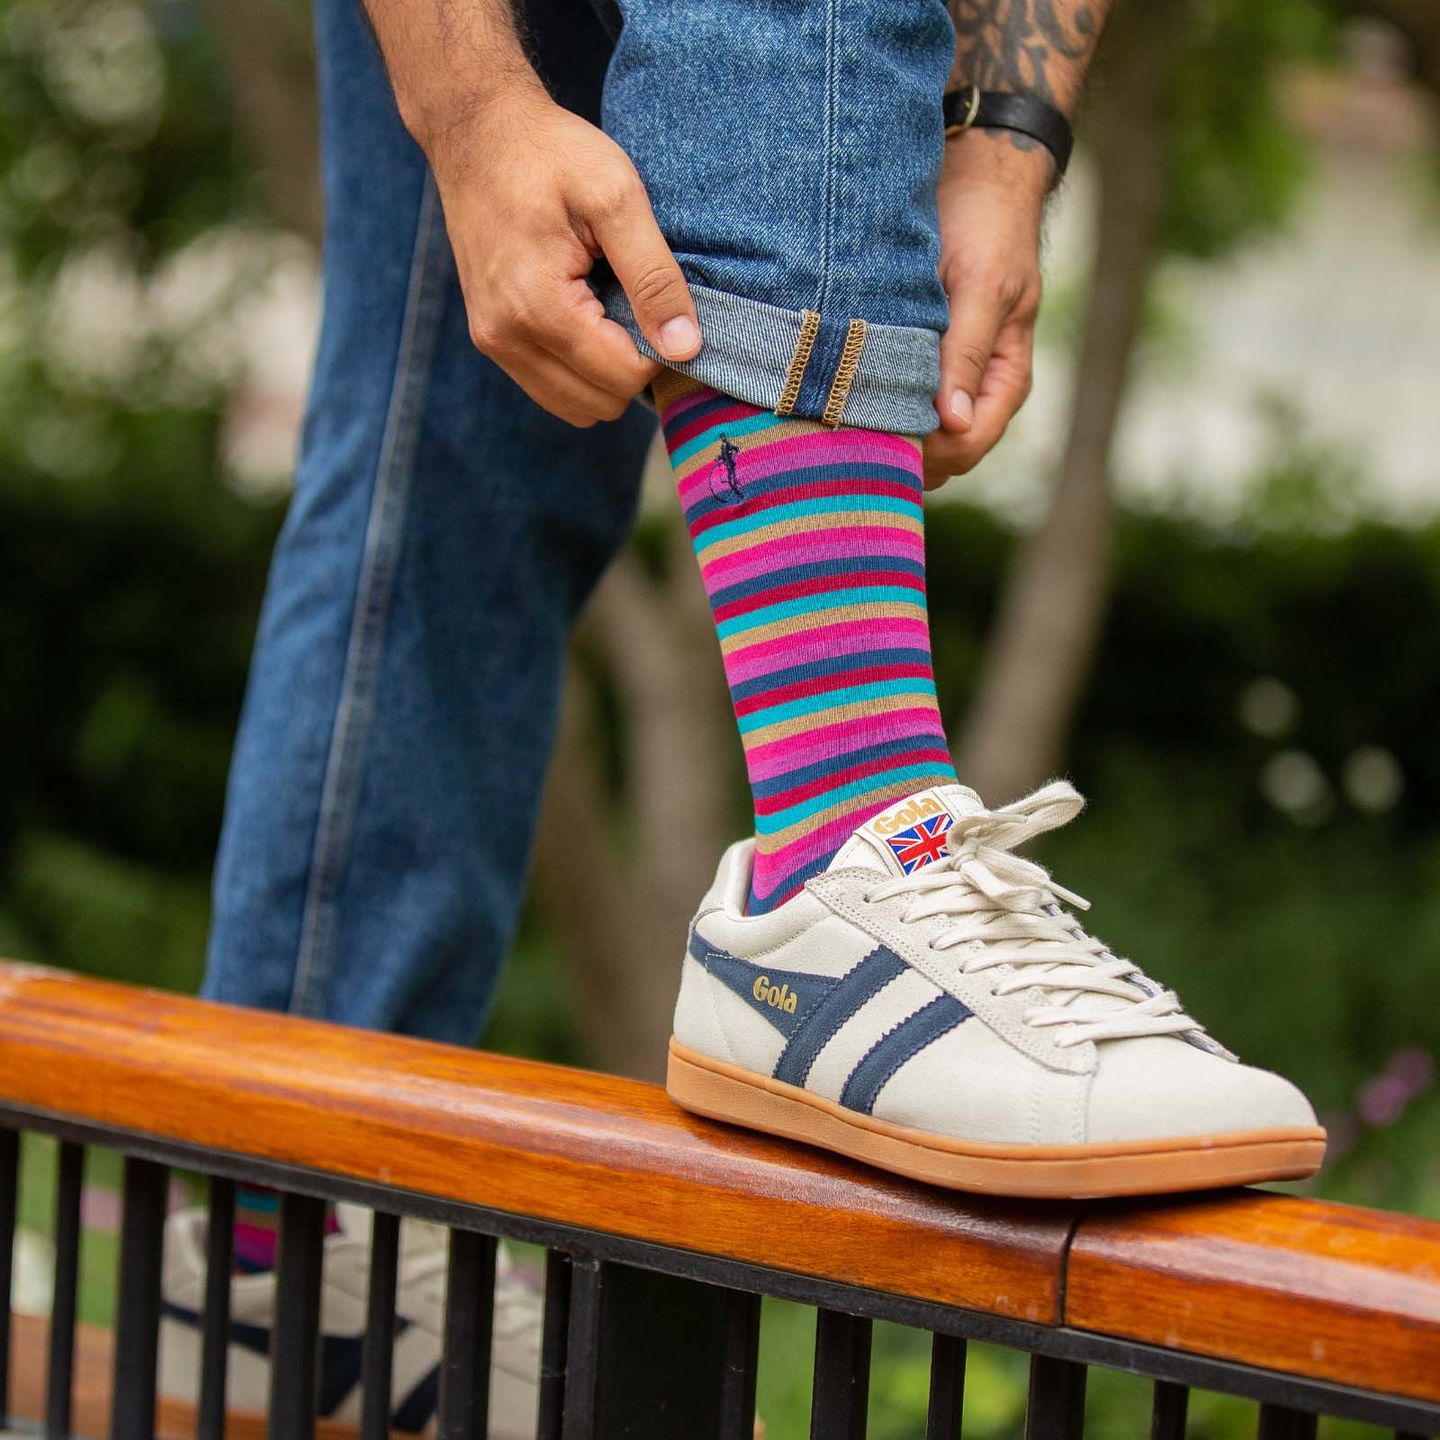 A close up of a person wearing a multicoloured sock